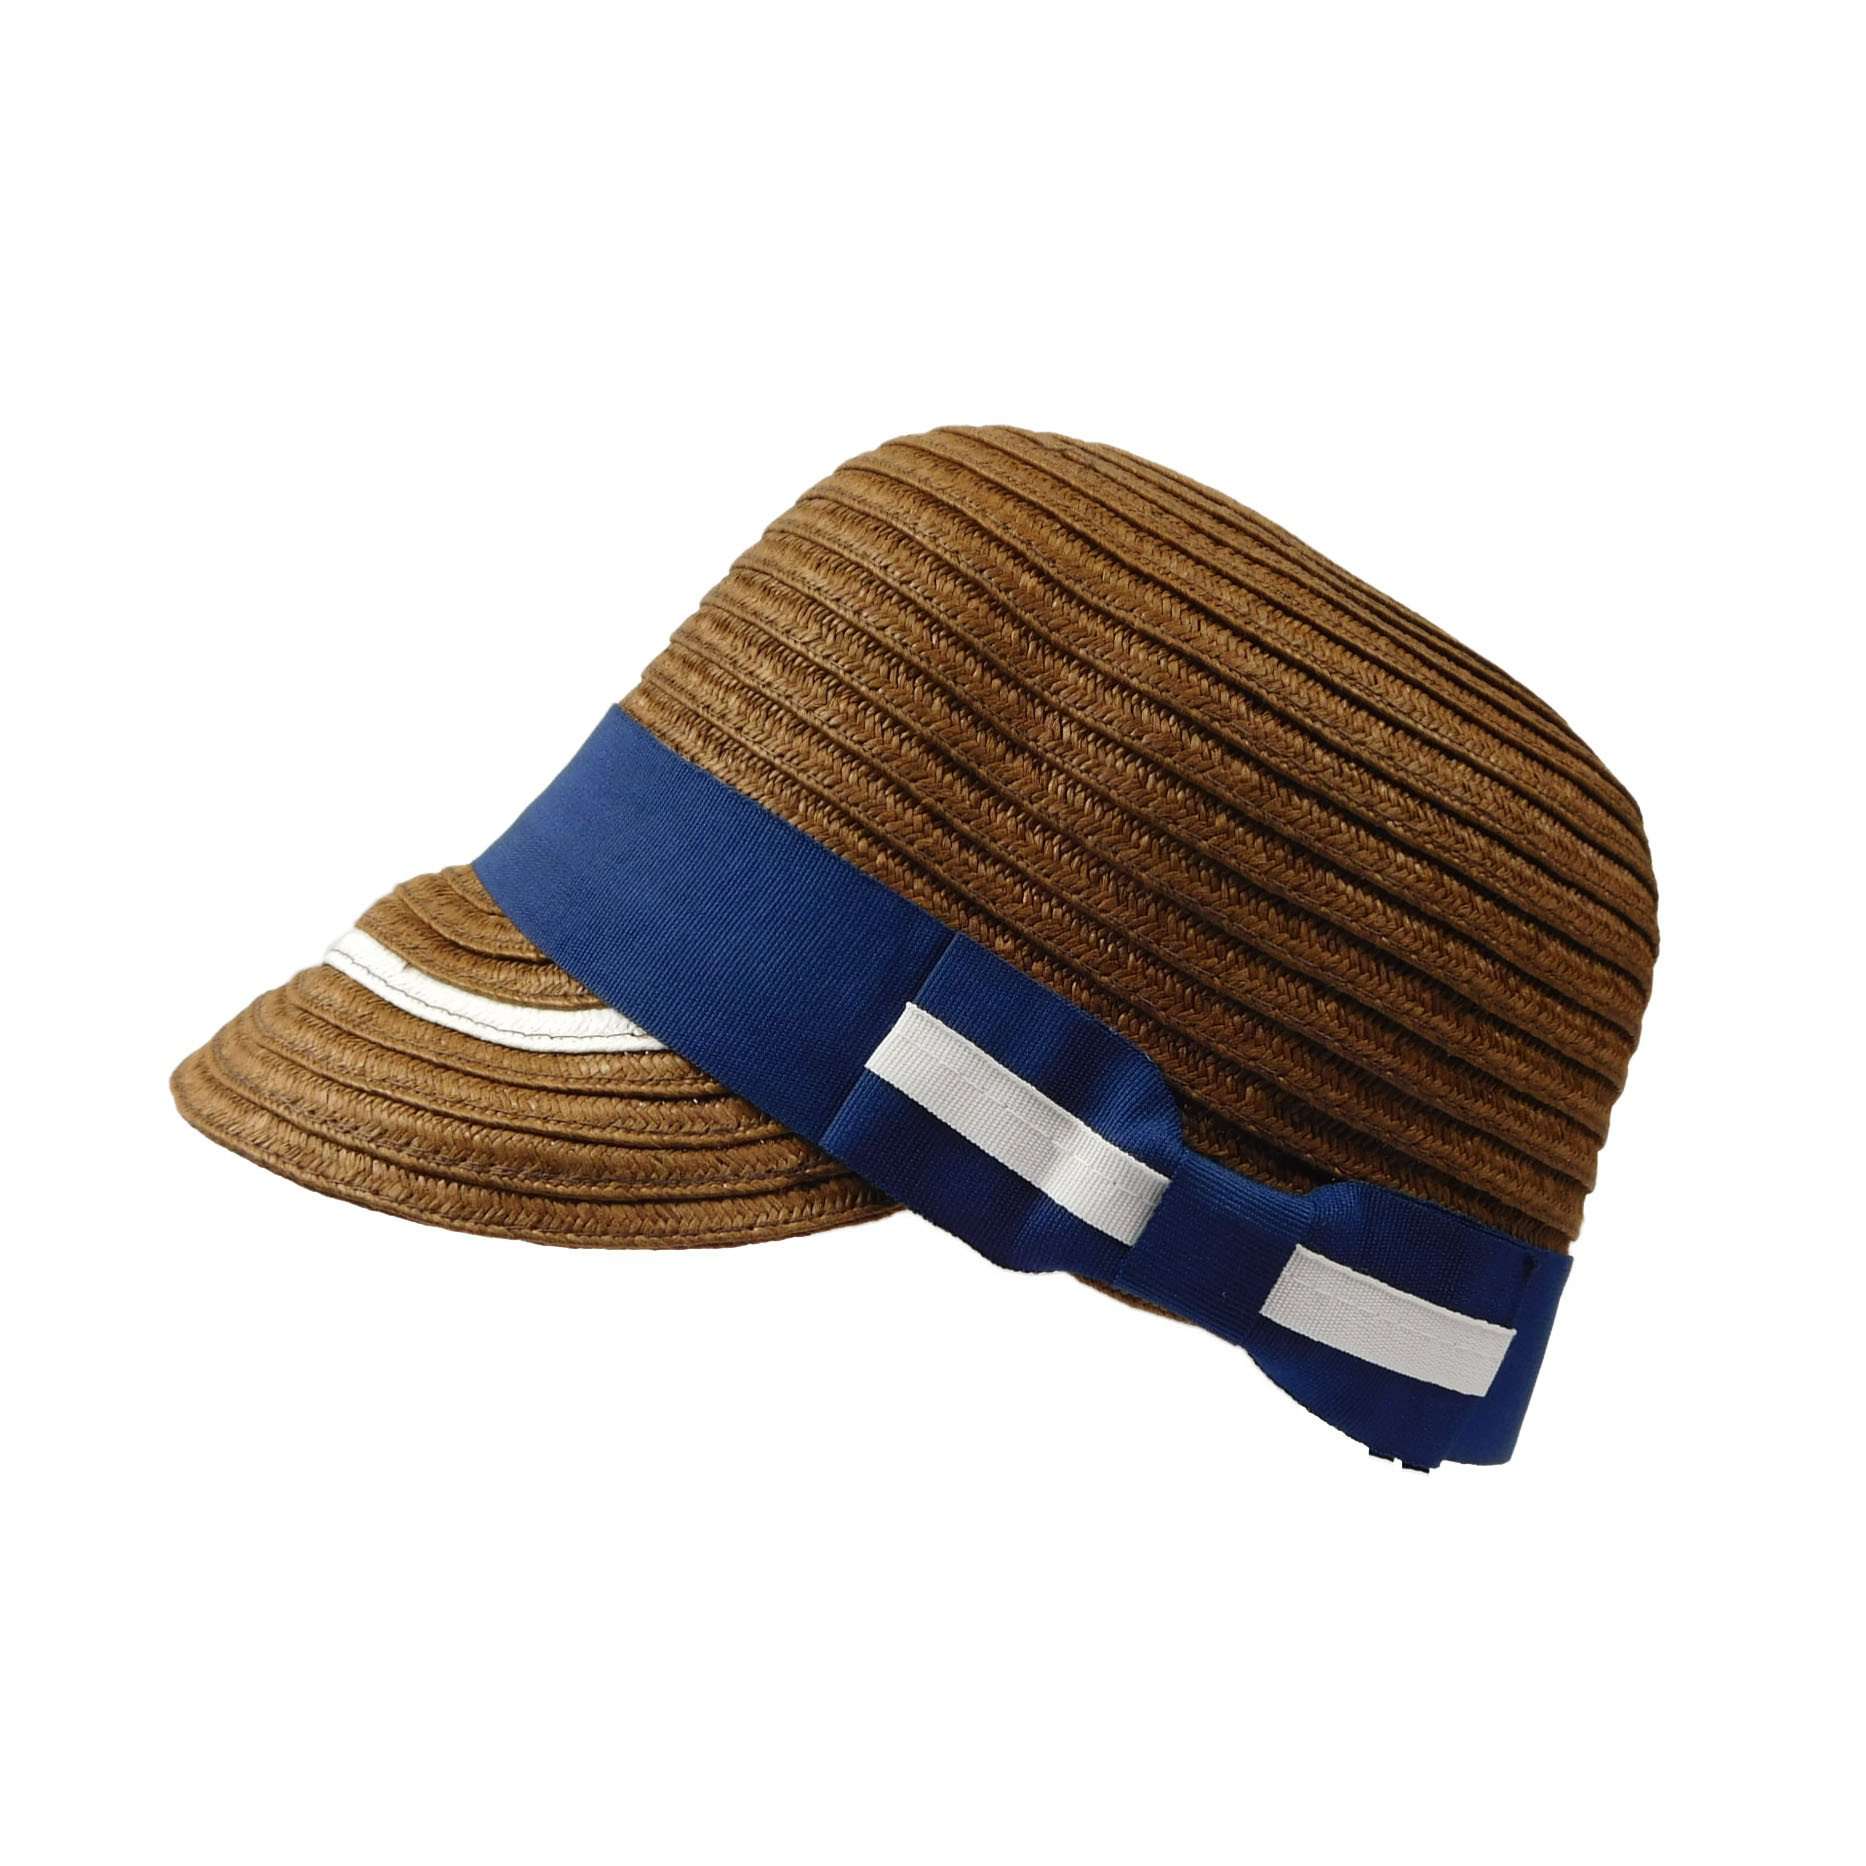 Small Straw Brim Cap with Ribbon Band and Bow by JSA for Women Cap Jeanne Simmons    